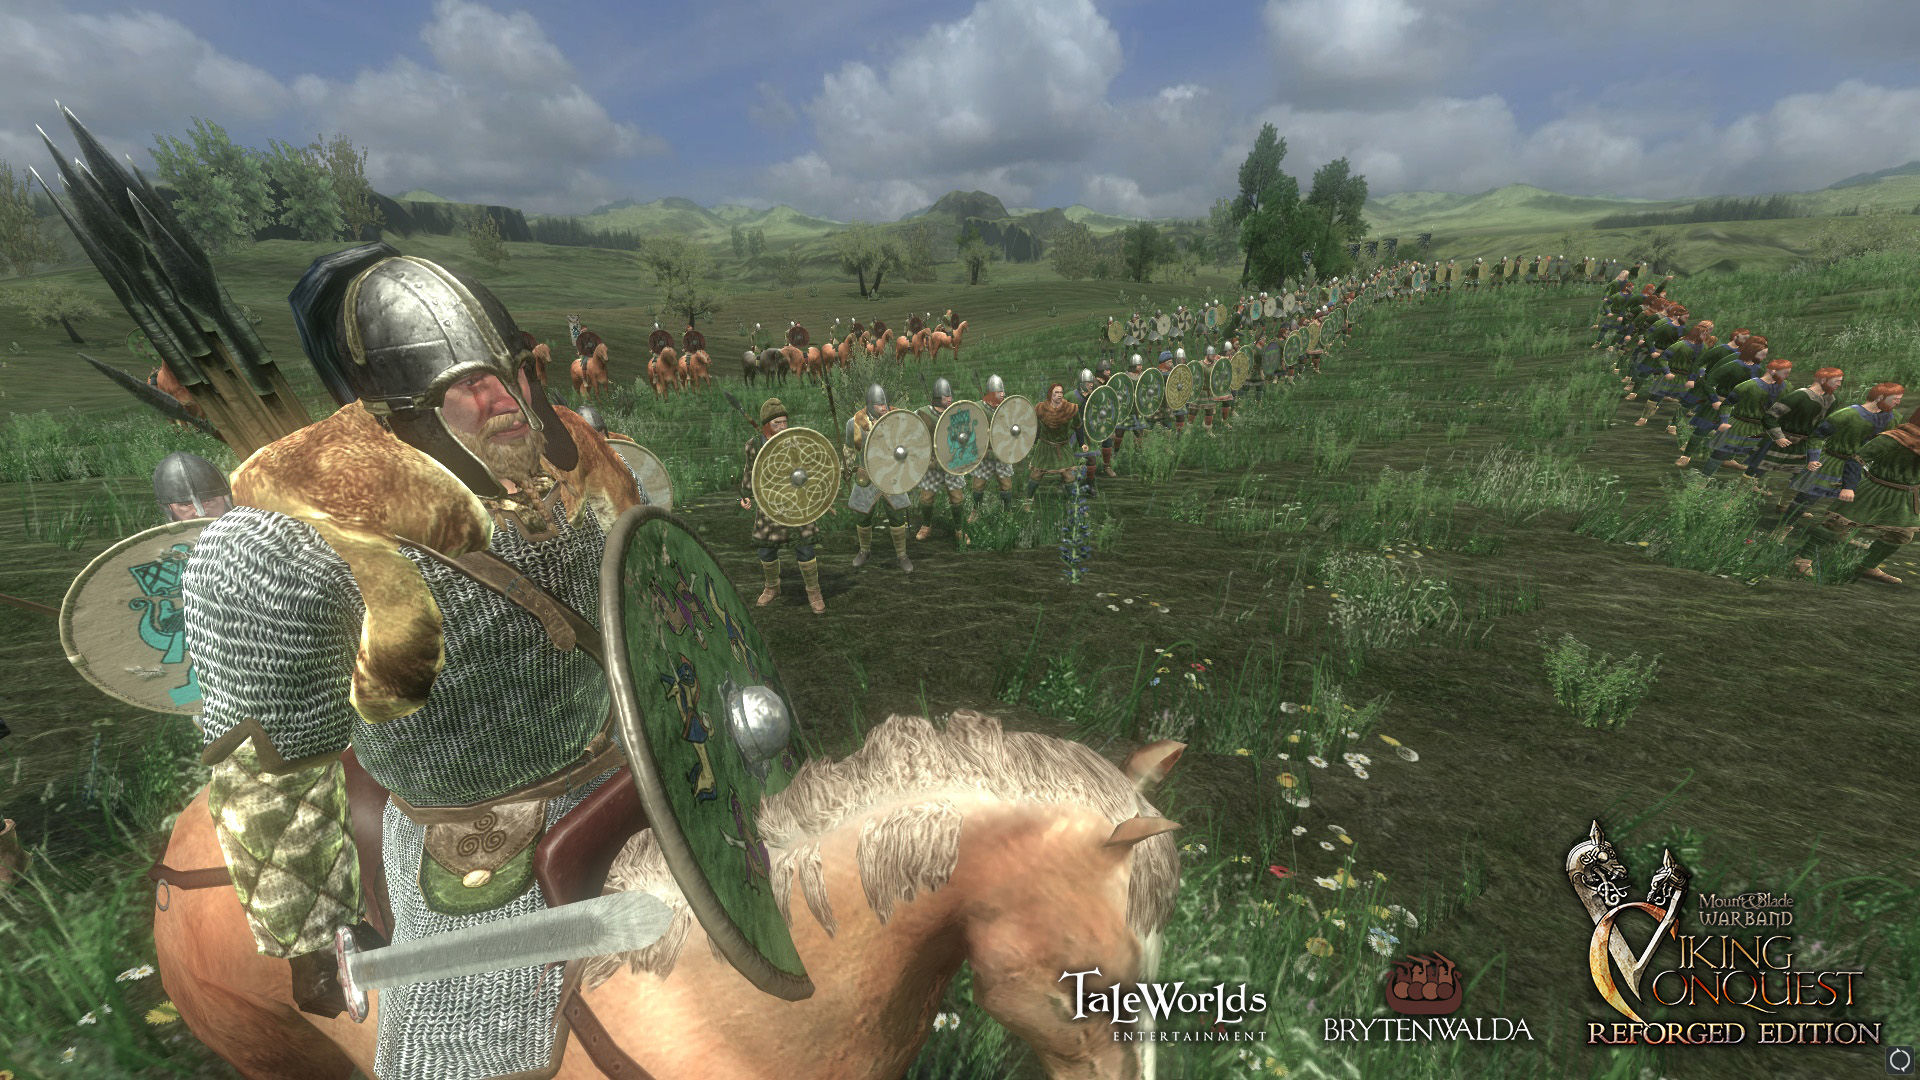 mount and blade viking conquest cheat engine